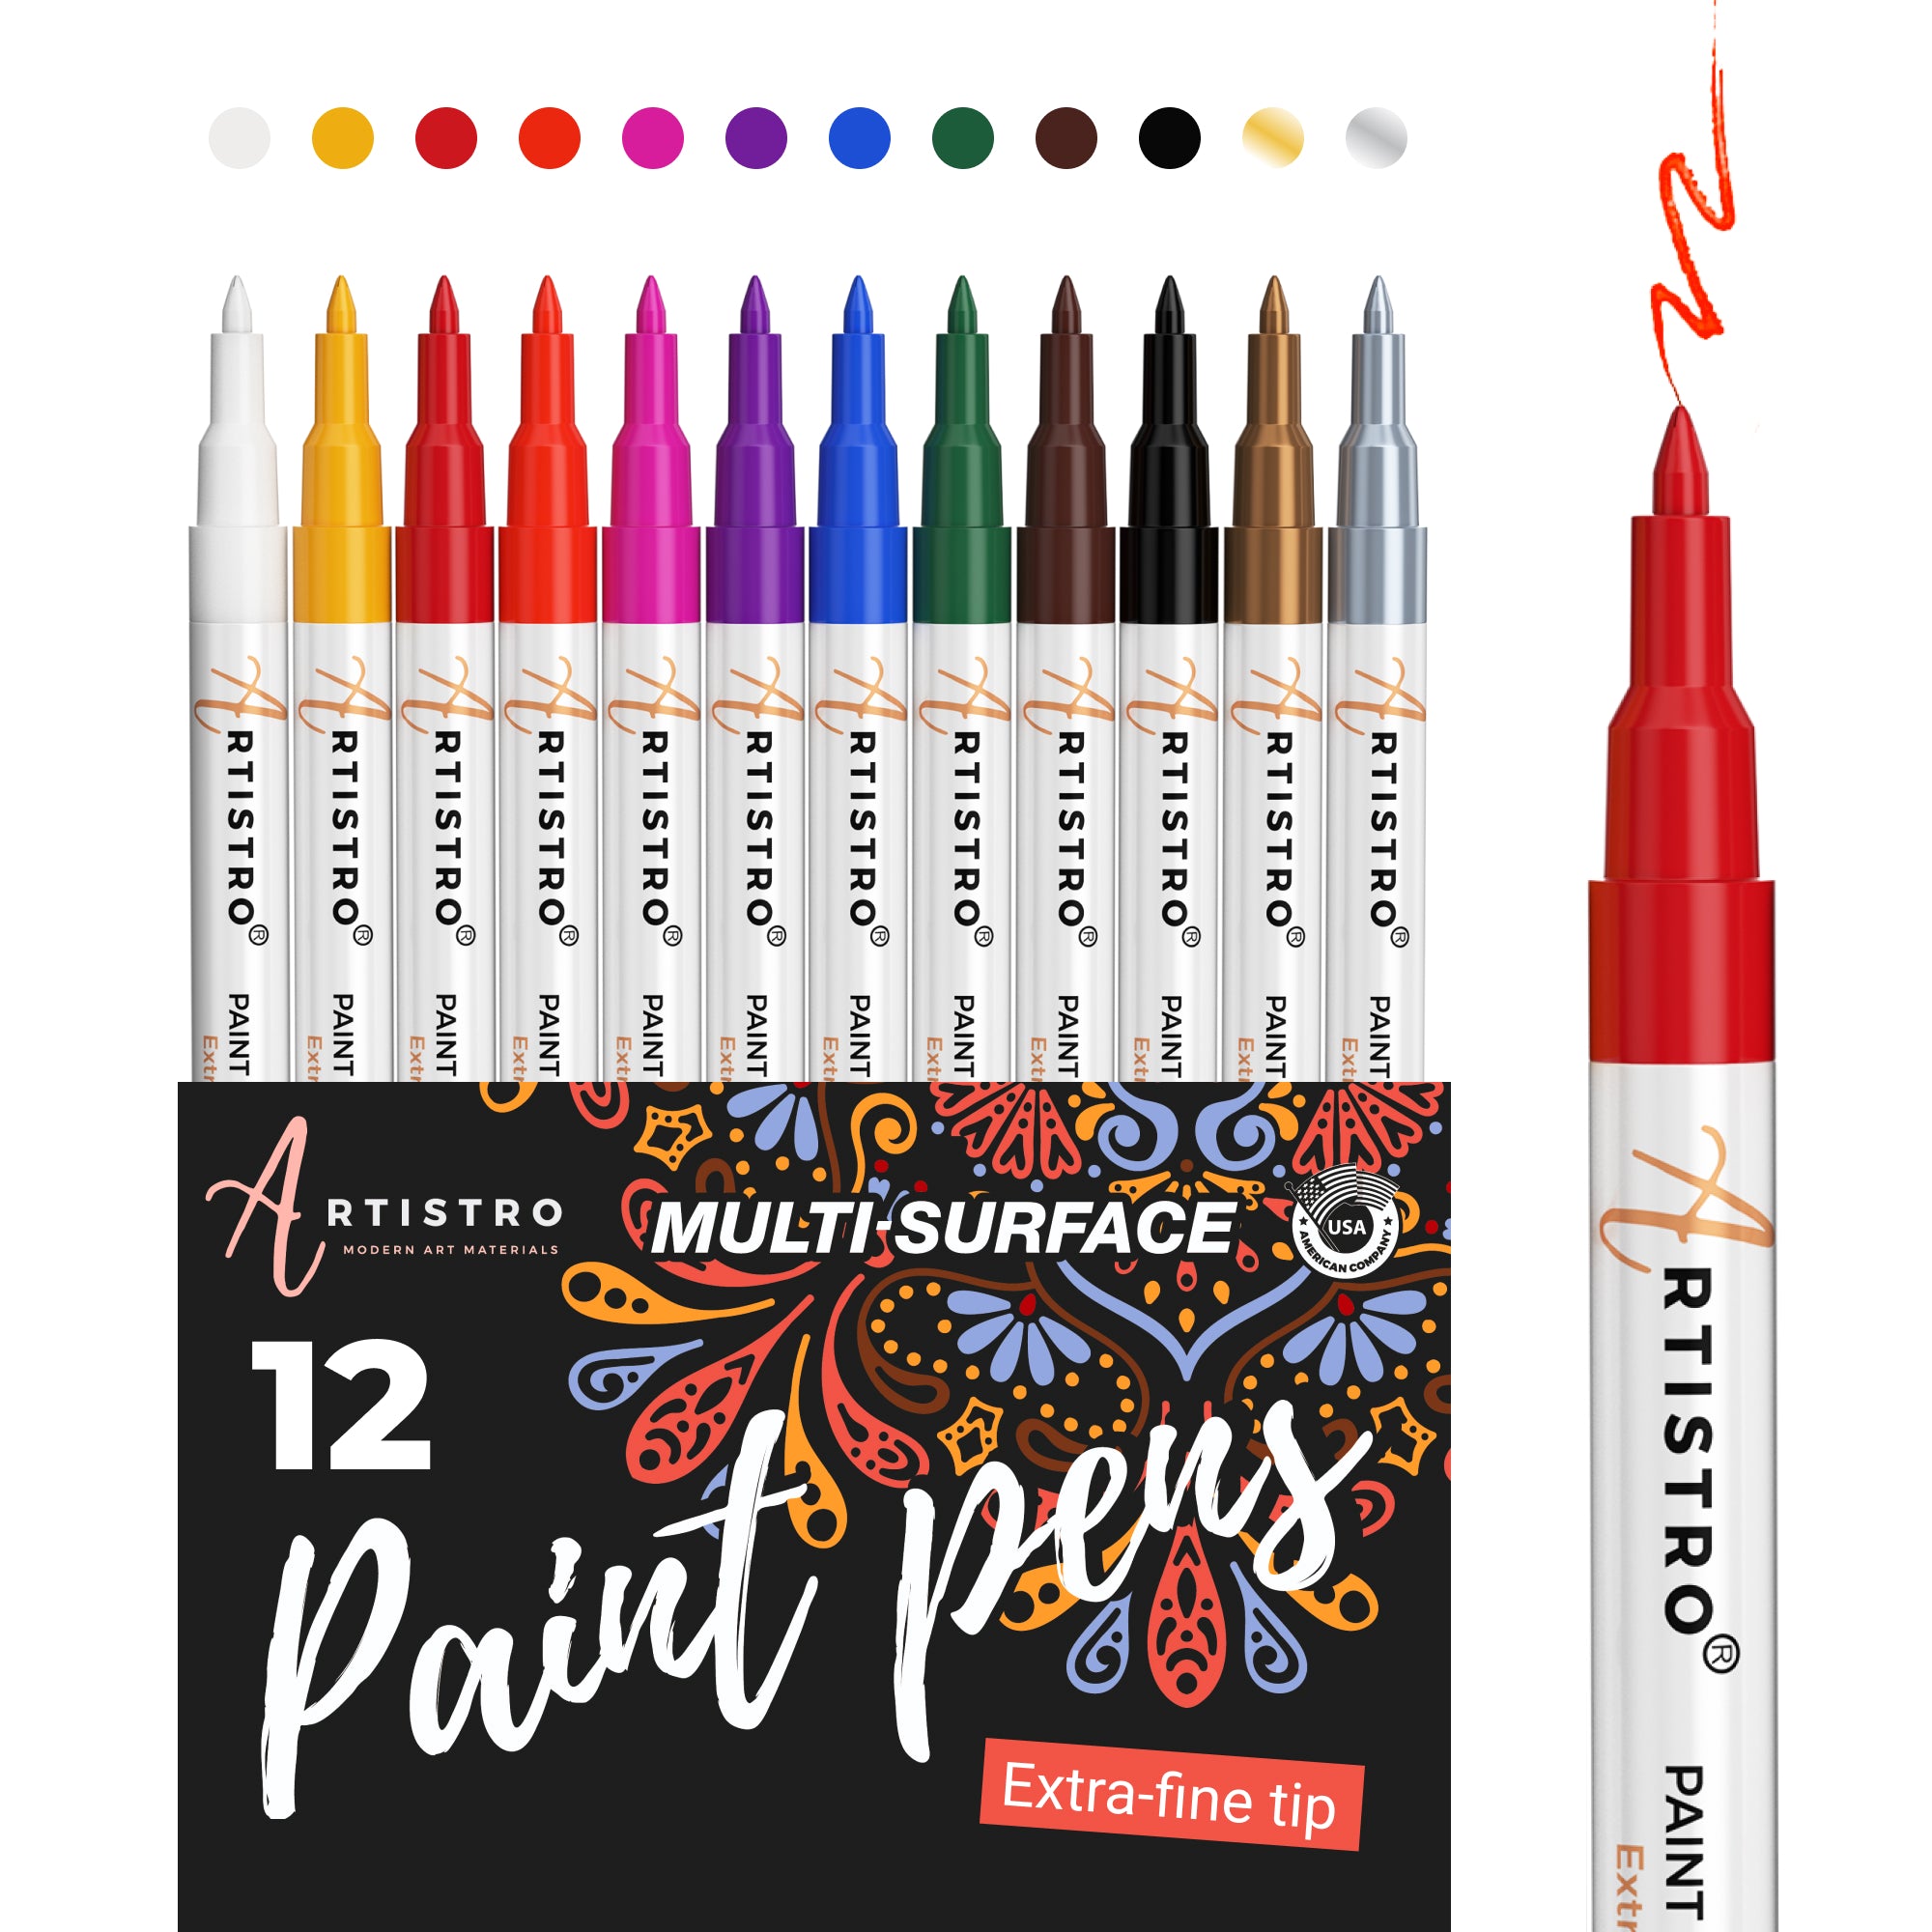 Metallic Paint Pens for Rock Painting, Stone, Pebbles, Ceramic, Glass, Wood, Fabric, Scrapbook Journals, Photo Albums, Card Stocks. Set of 12 Acrylic